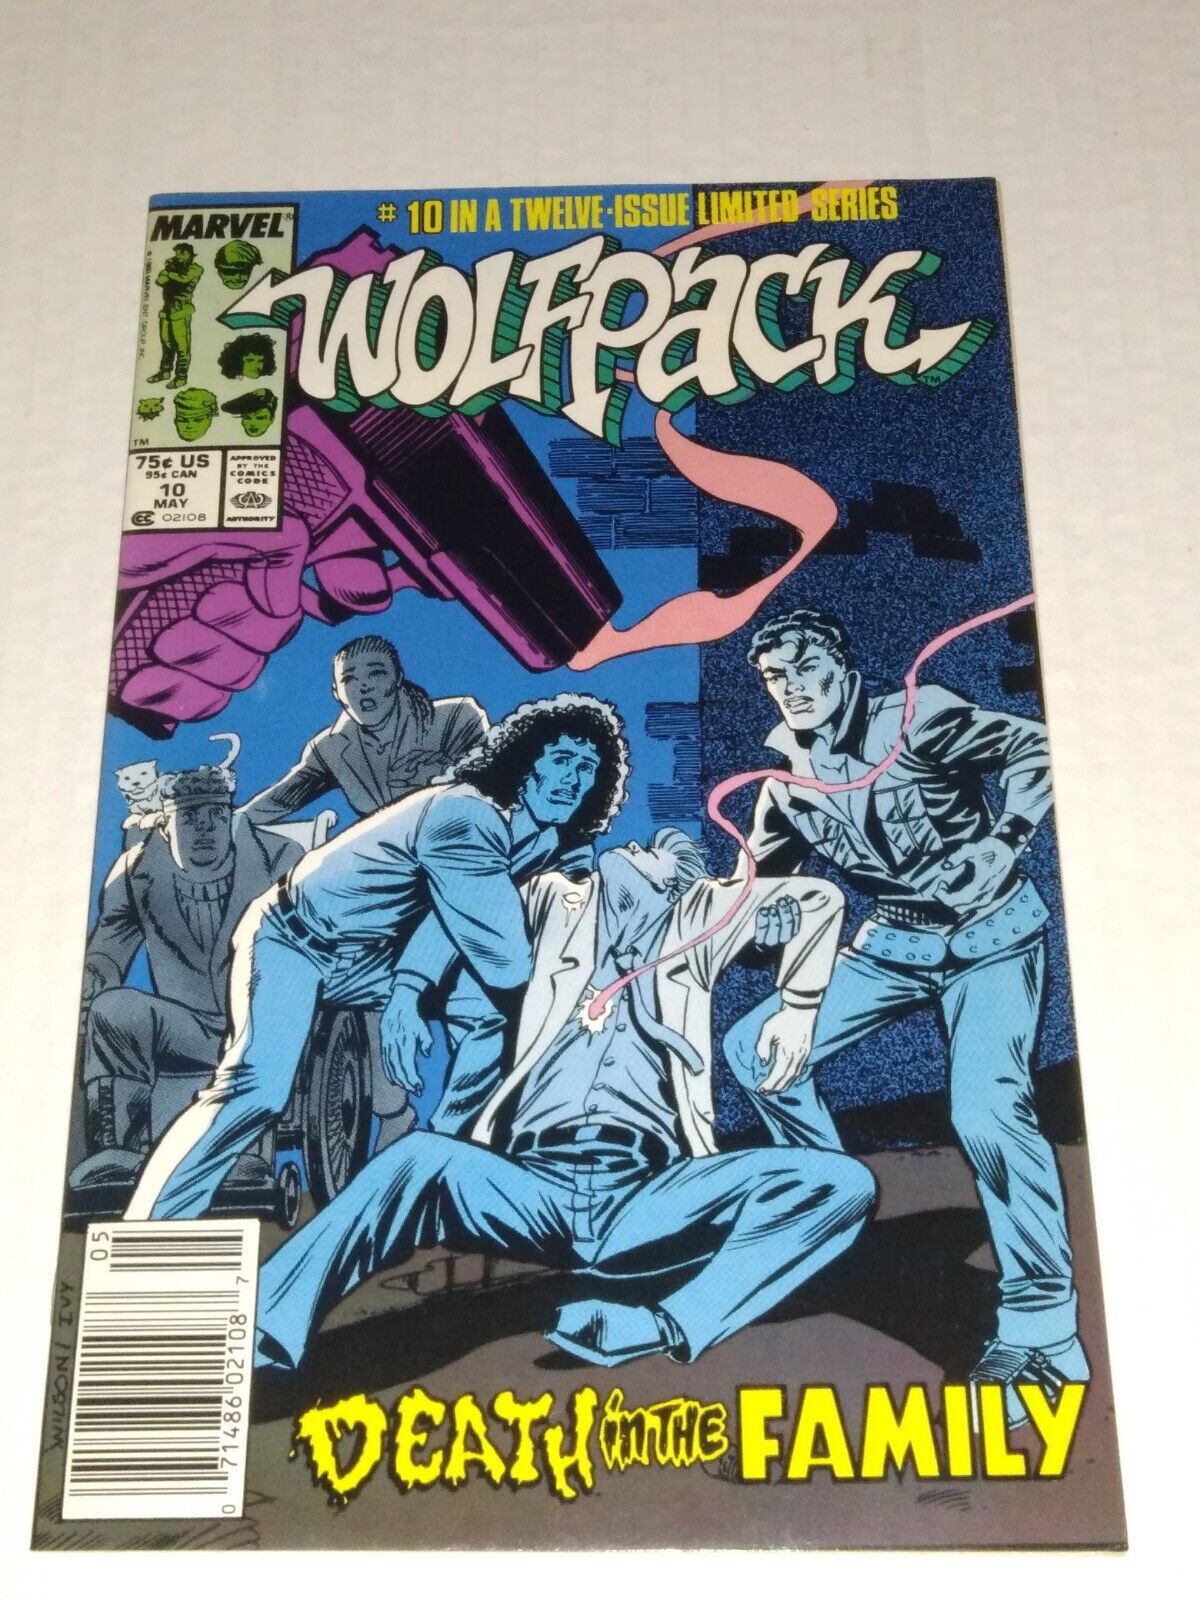 Wolfpack #10, 12 Issue Limited Series,  Marvel Comics 1989